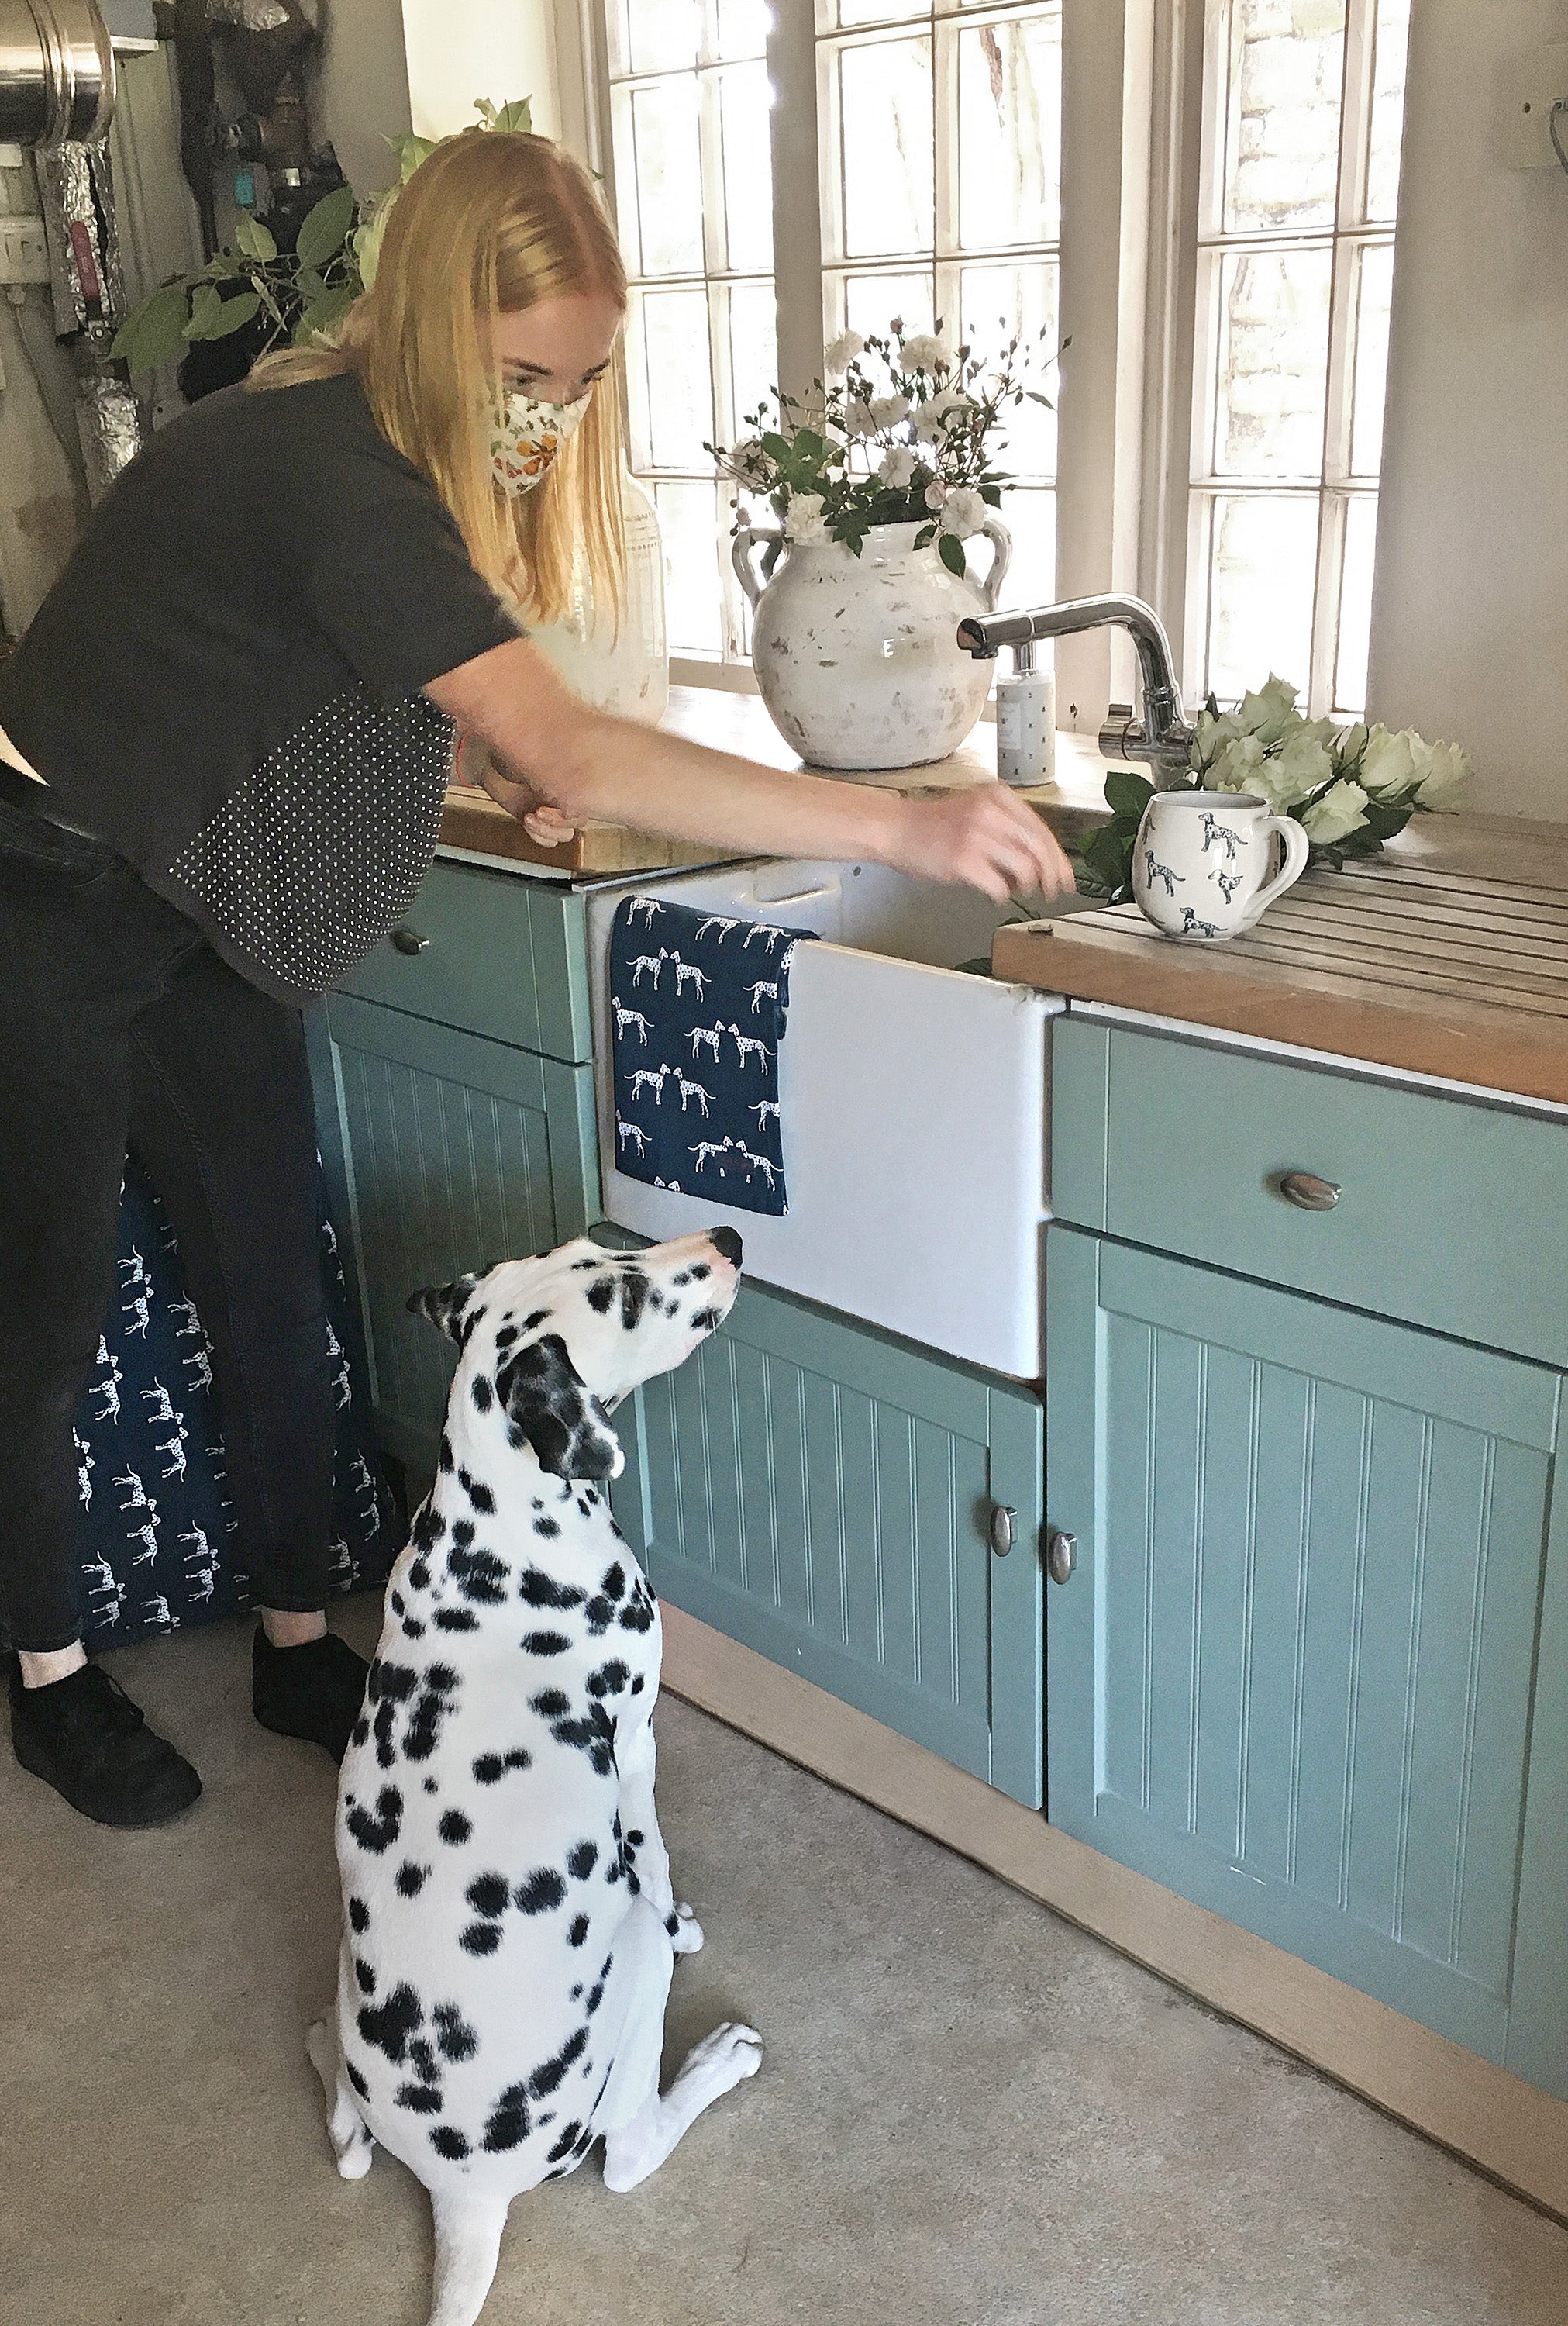 Read all about Sophie Allport's Dalmatian Photoshoot